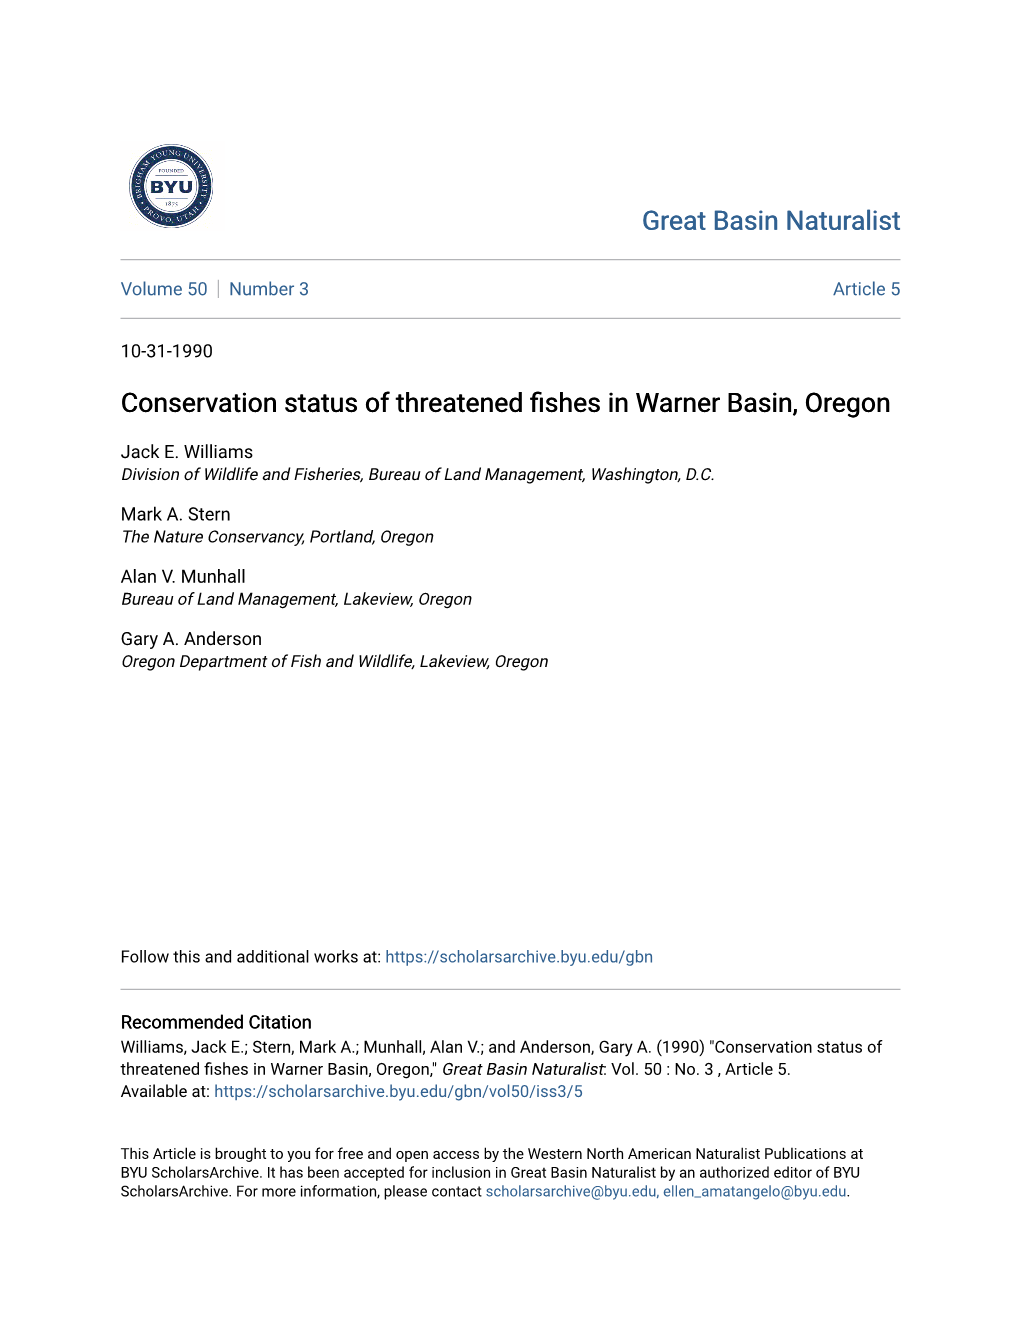 Conservation Status of Threatened Fishes in Warner Basin, Oregon